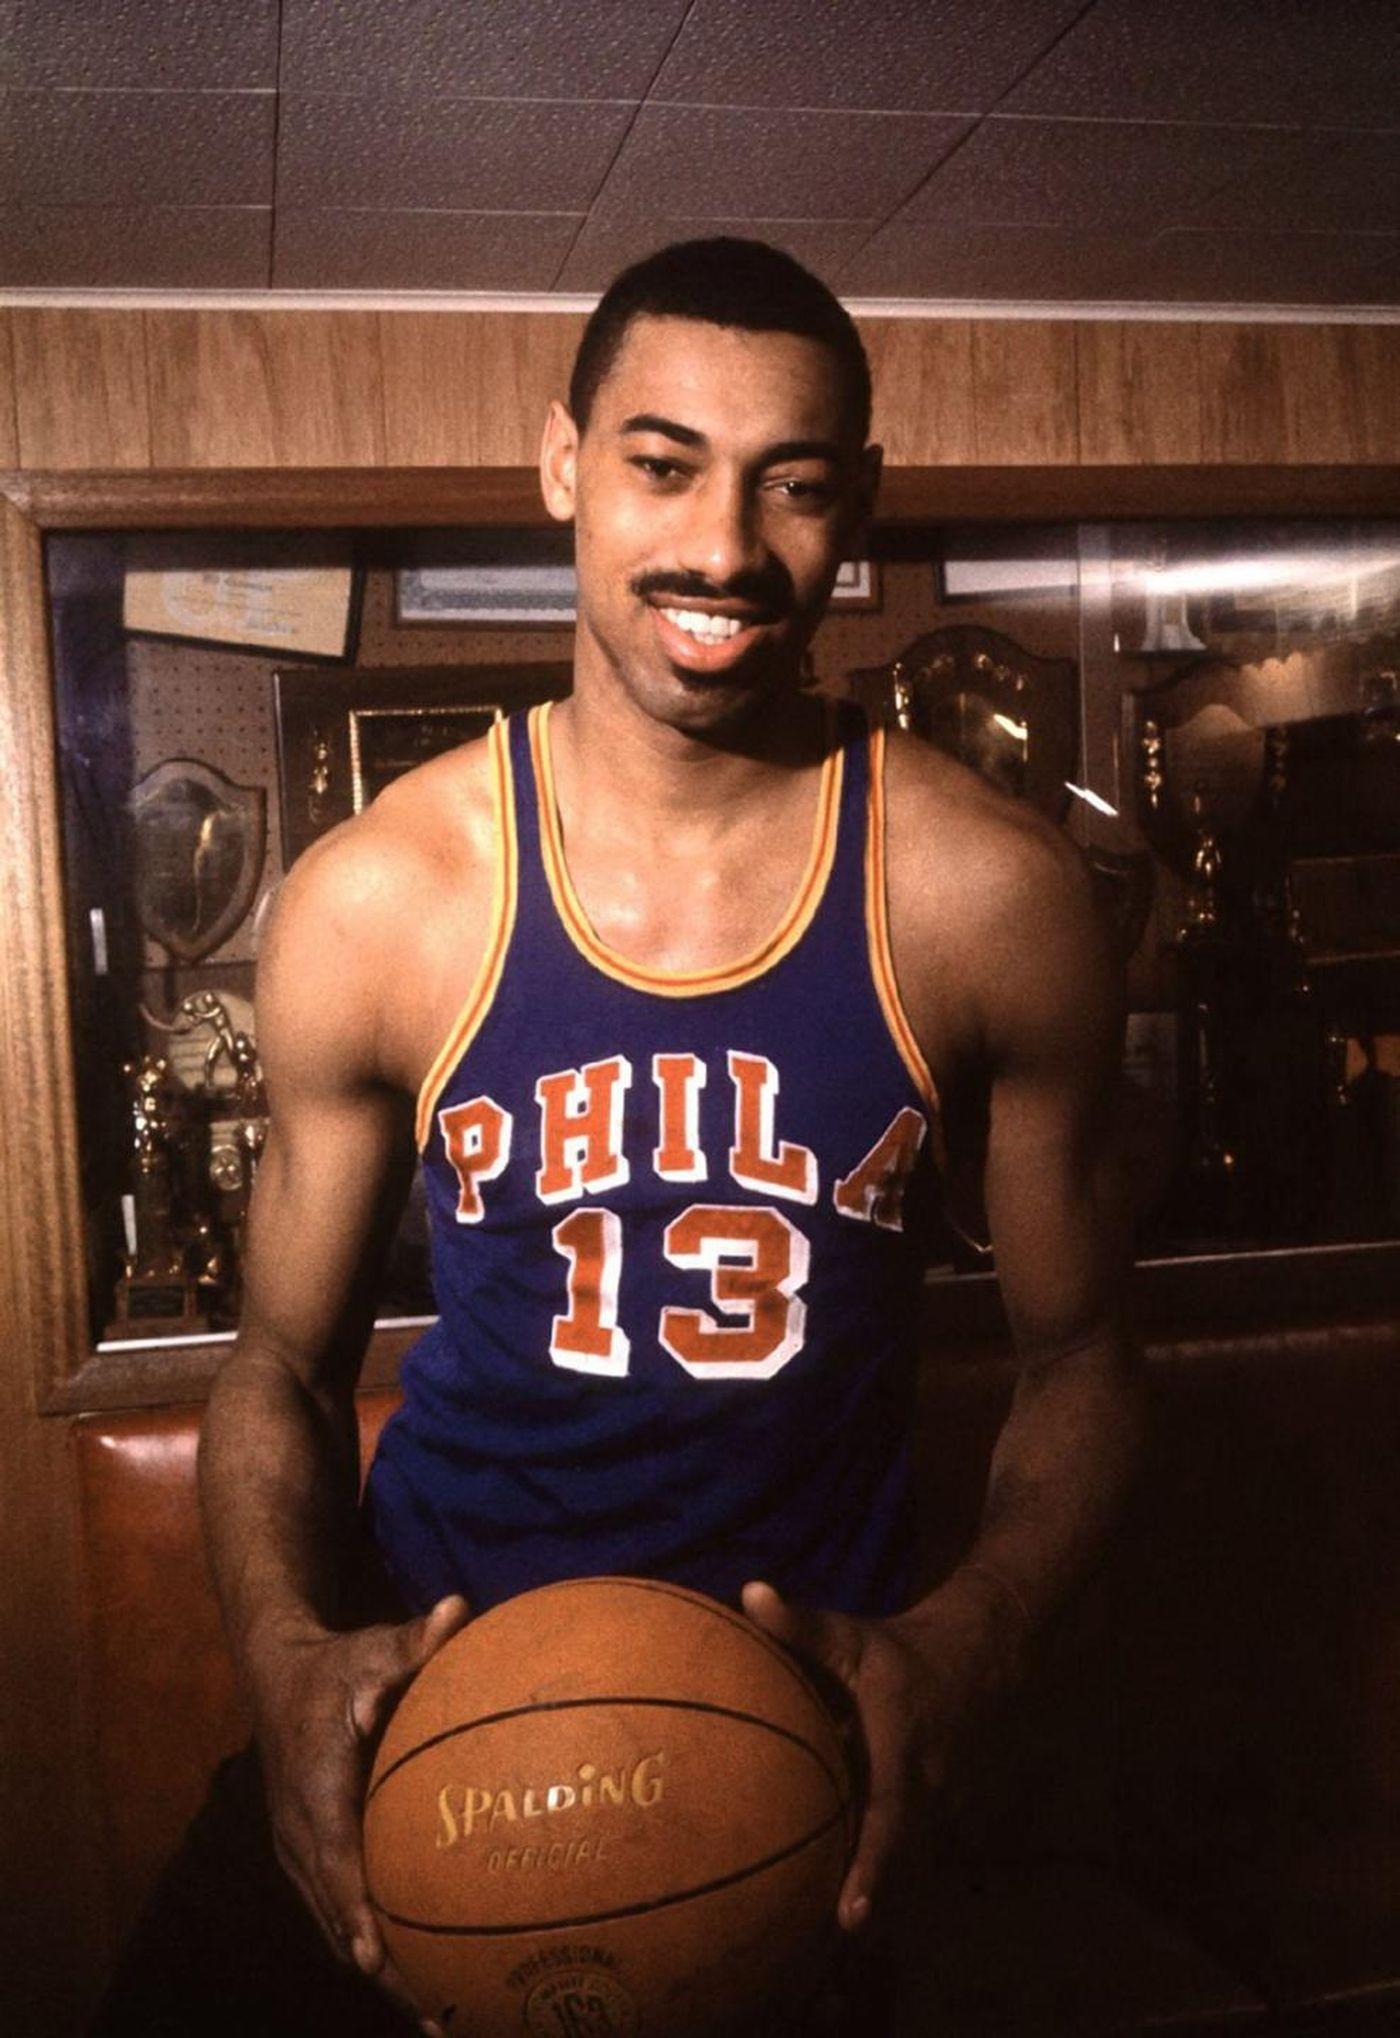 The day Wilt Chamberlain, NBA legend, died at 63 in 1999 Daily News